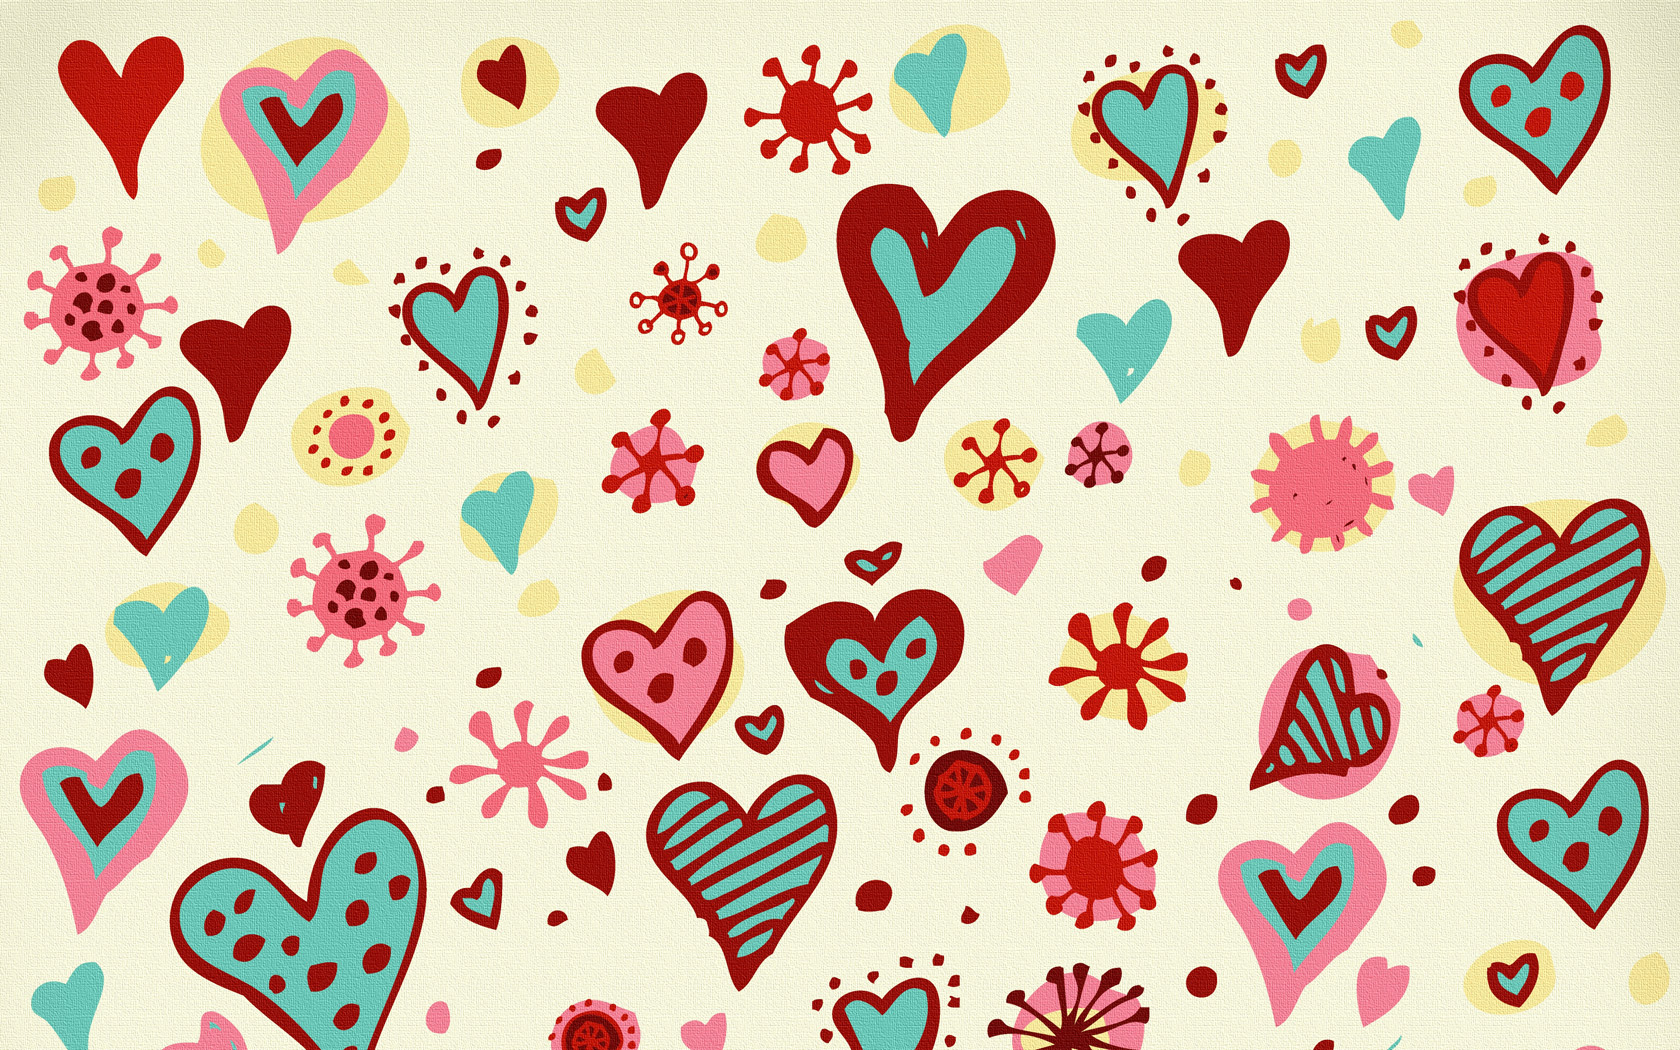 Hearts wallpapers and images - wallpapers, pictures, photos